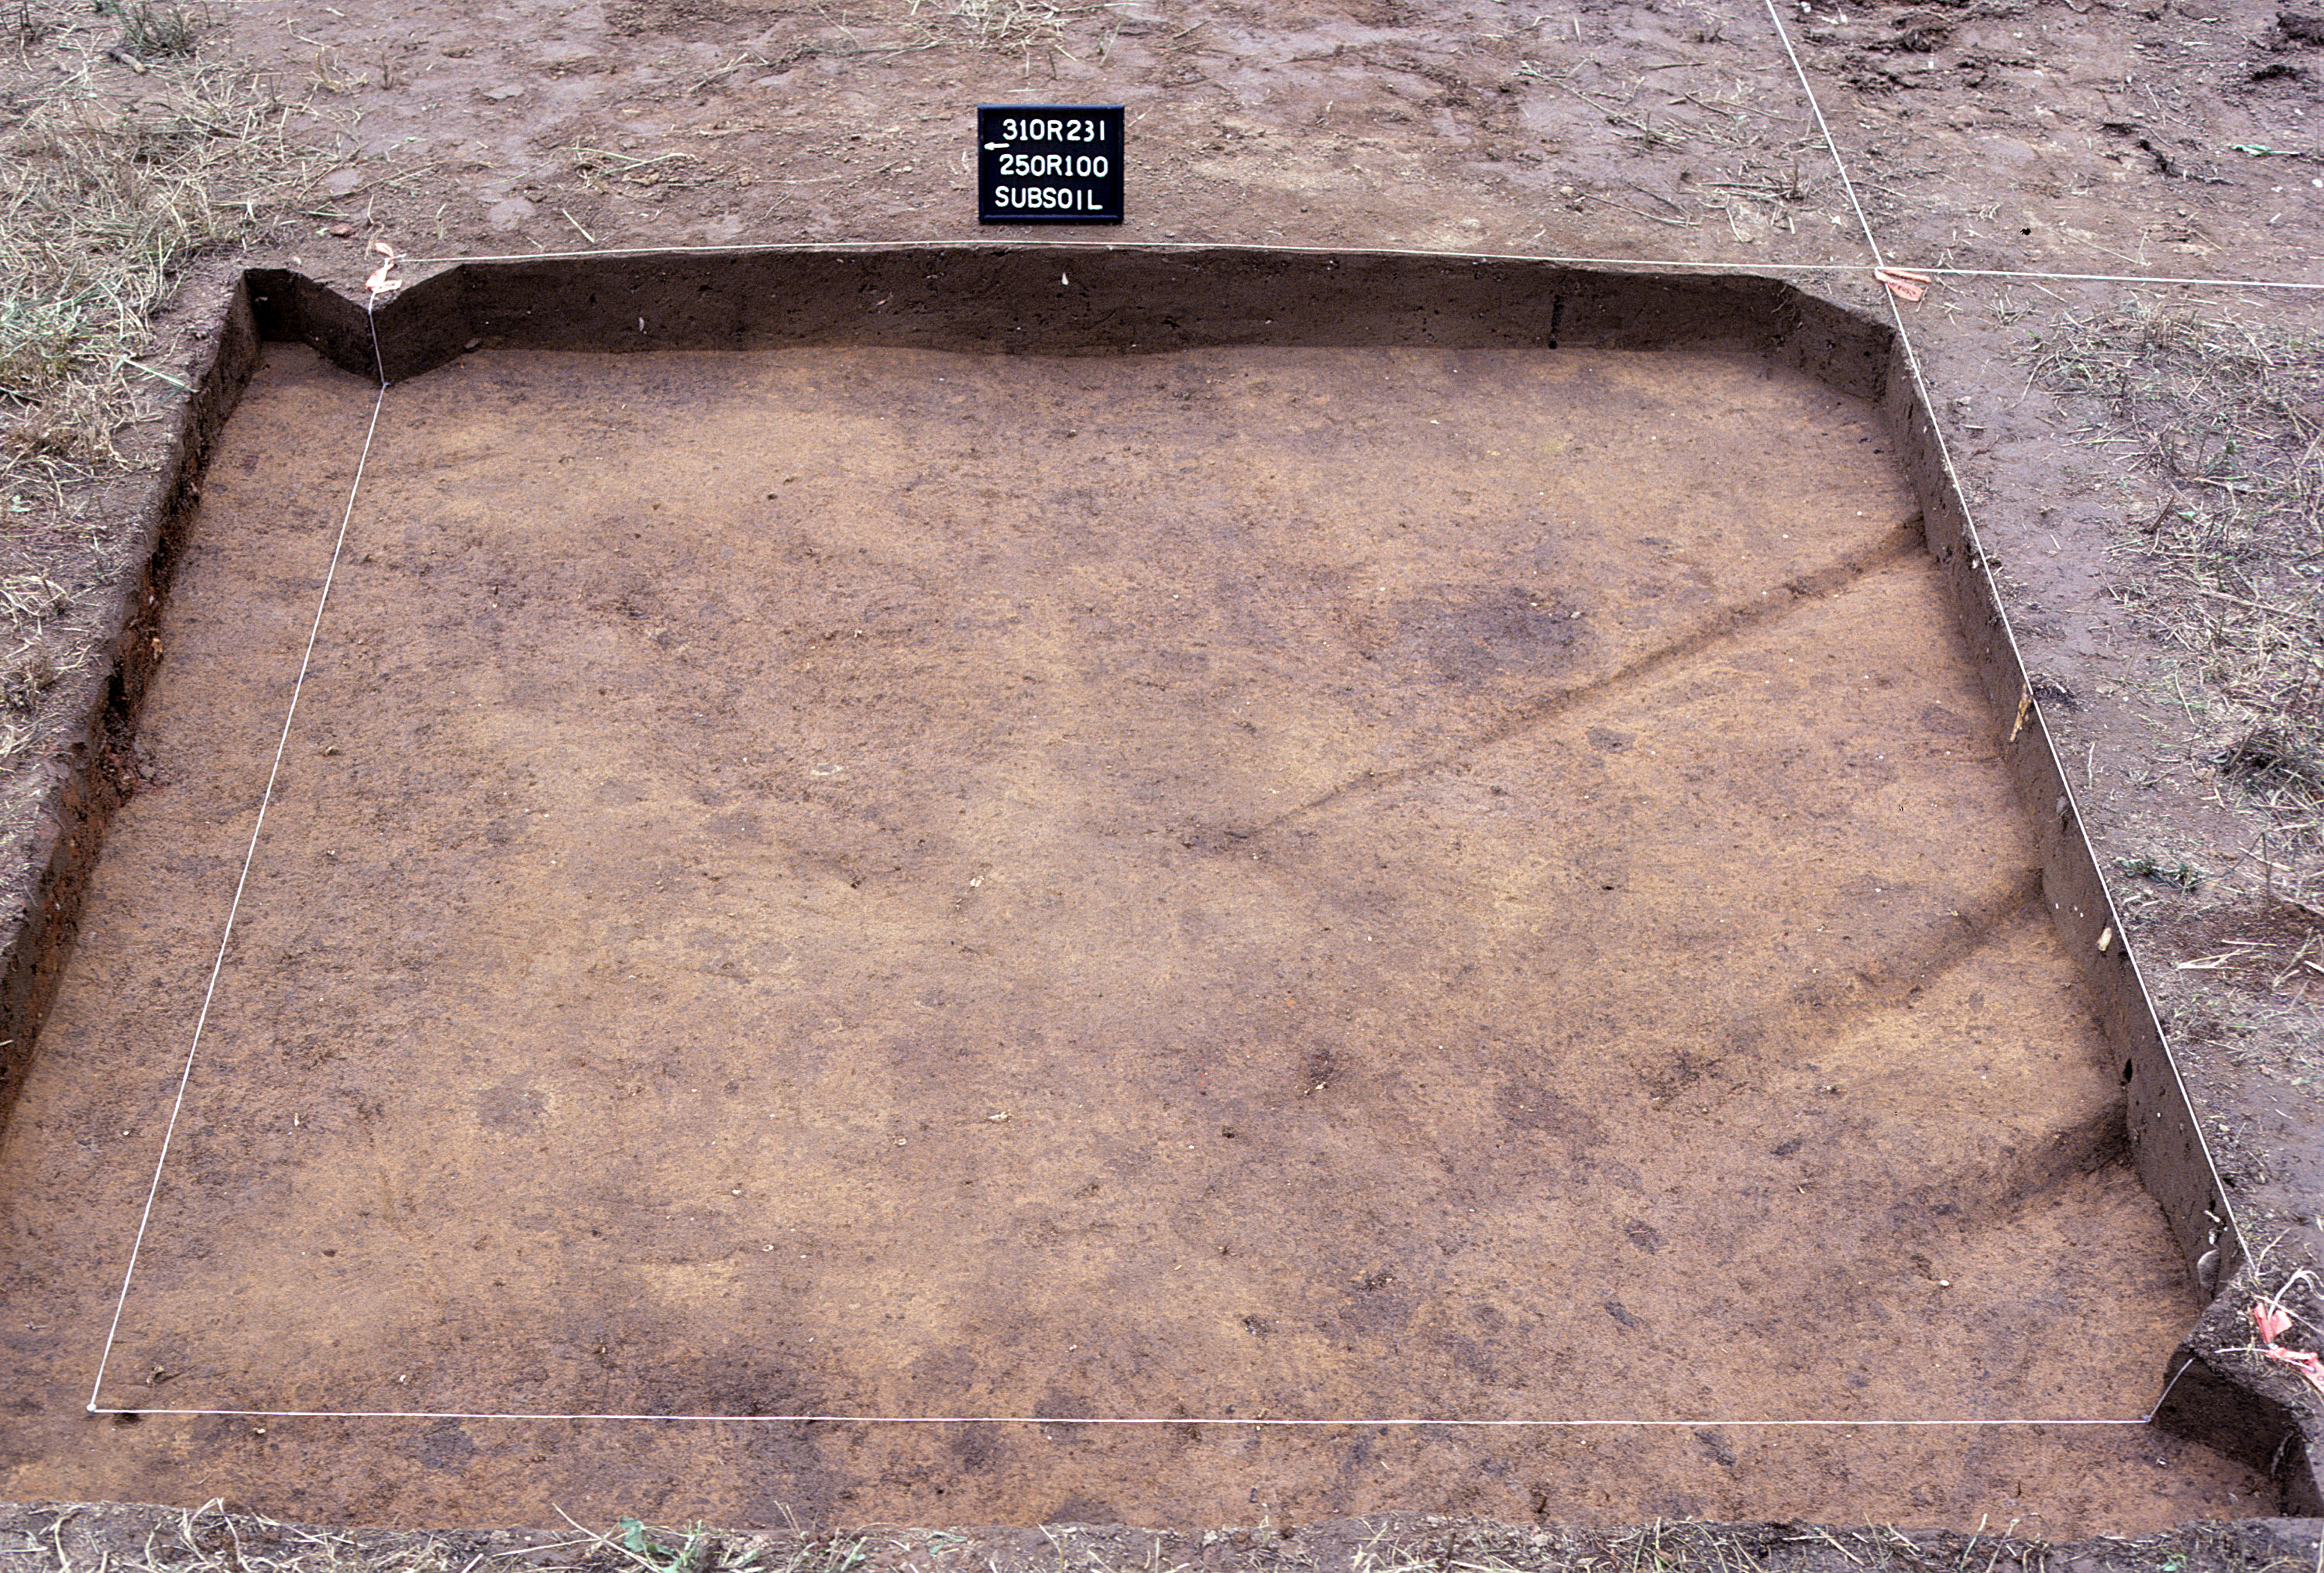 Figure 873. Sq. 250R100 at top of subsoil (view to east).